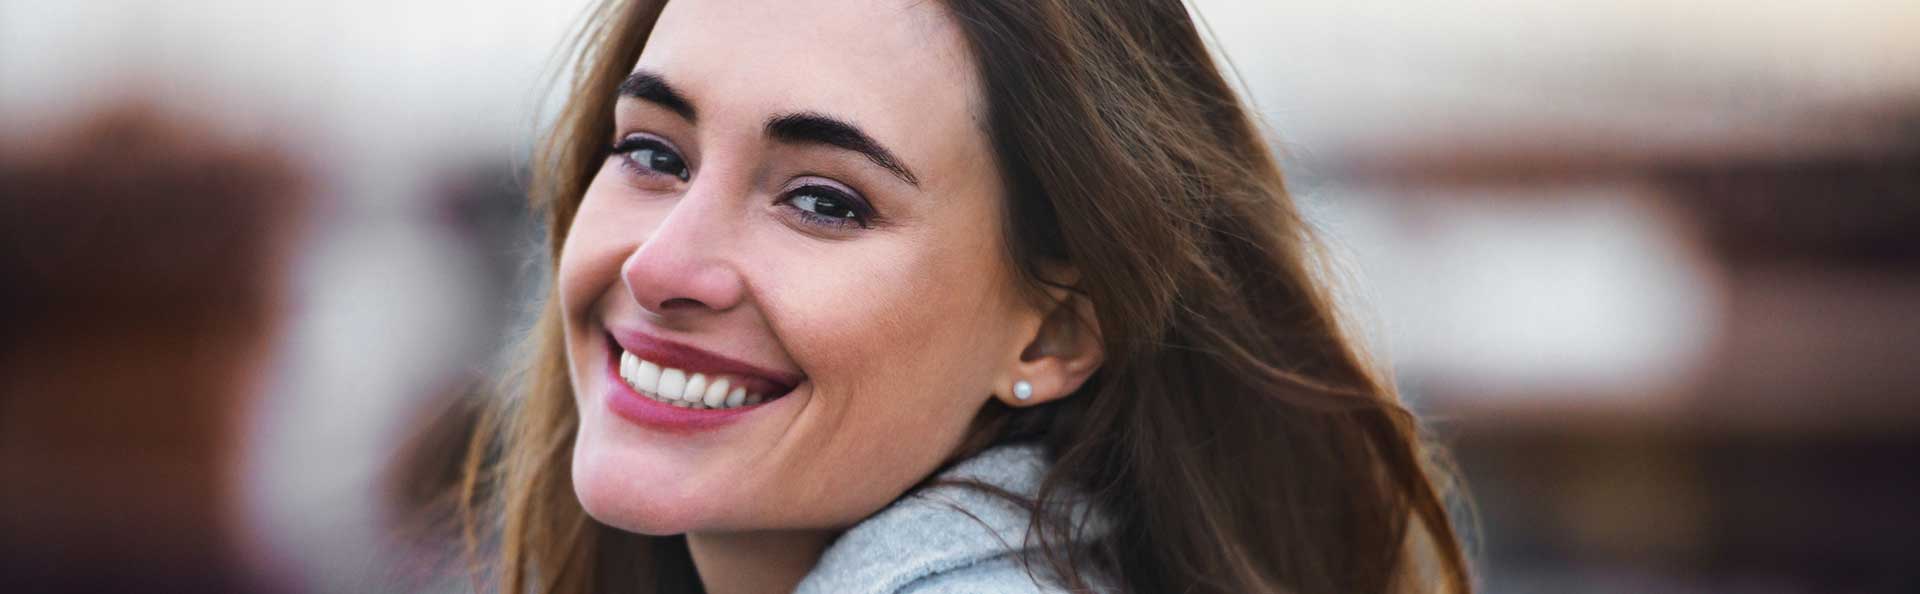 Beautiful woman smiling after Lasers treatments